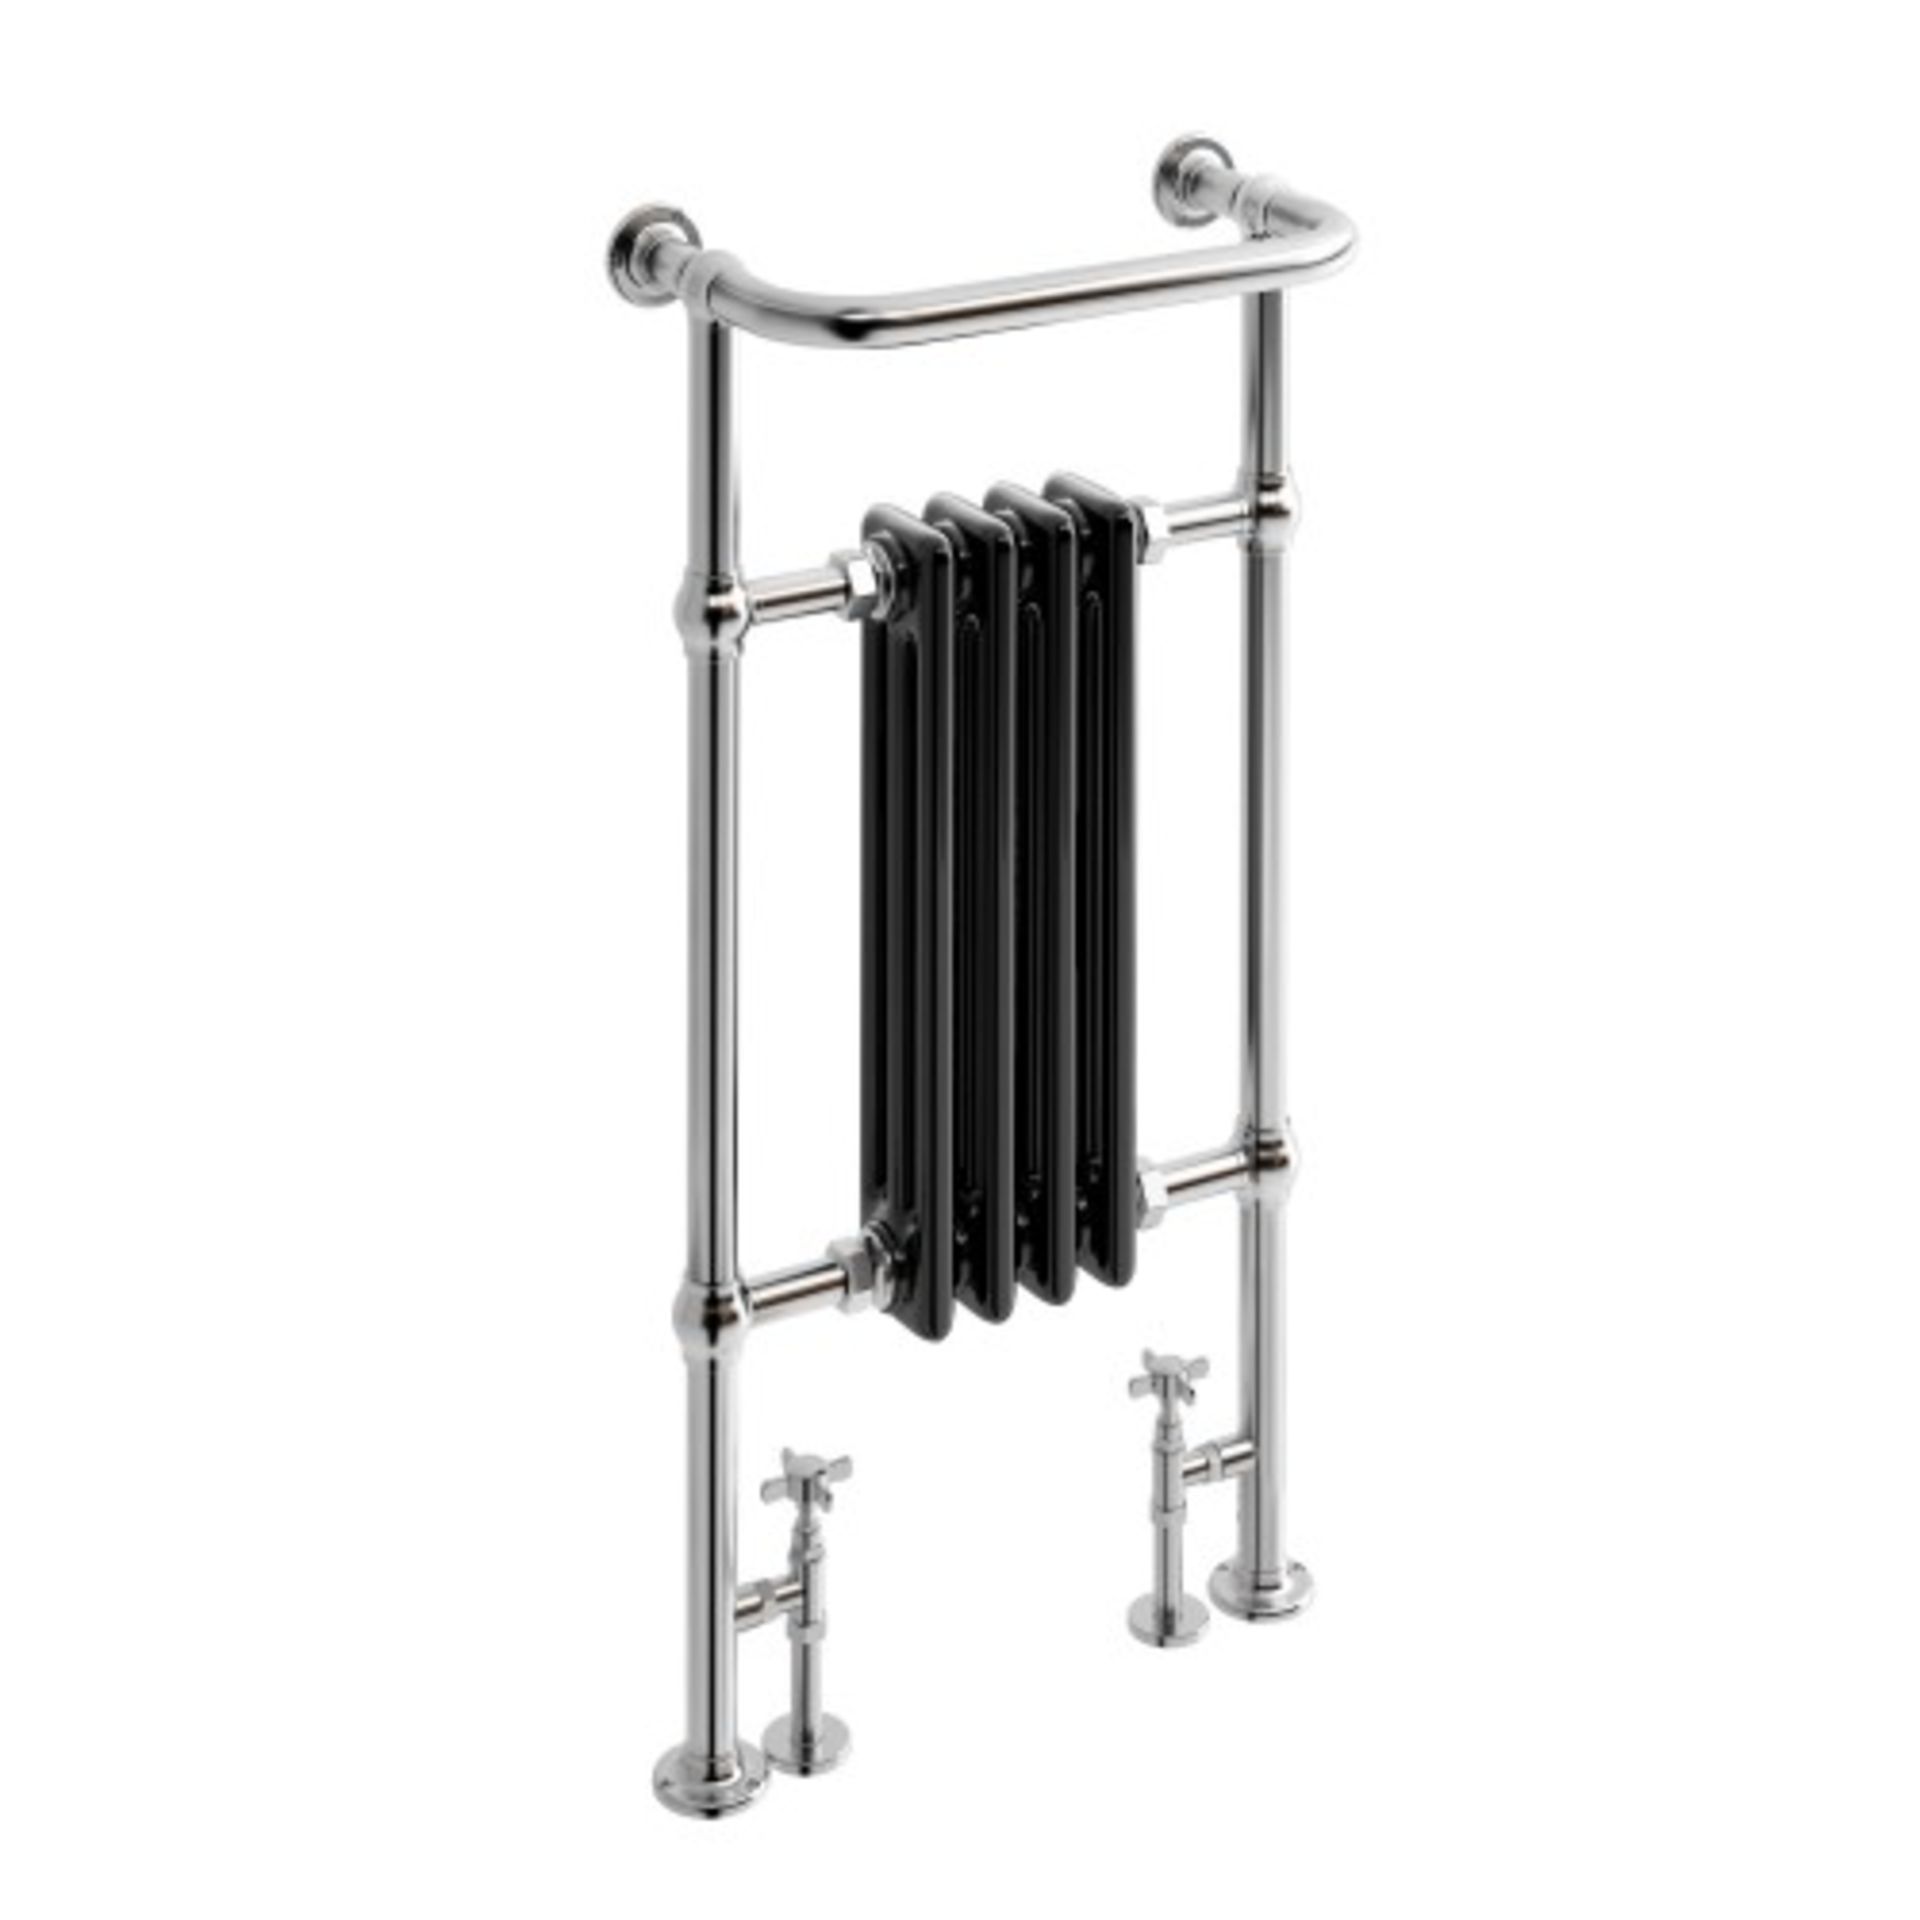 (EY103) 952X479MM TRADITIONAL BLACK TOWEL RAIL RADIATOR. RRP £419.99. Designed to complement any